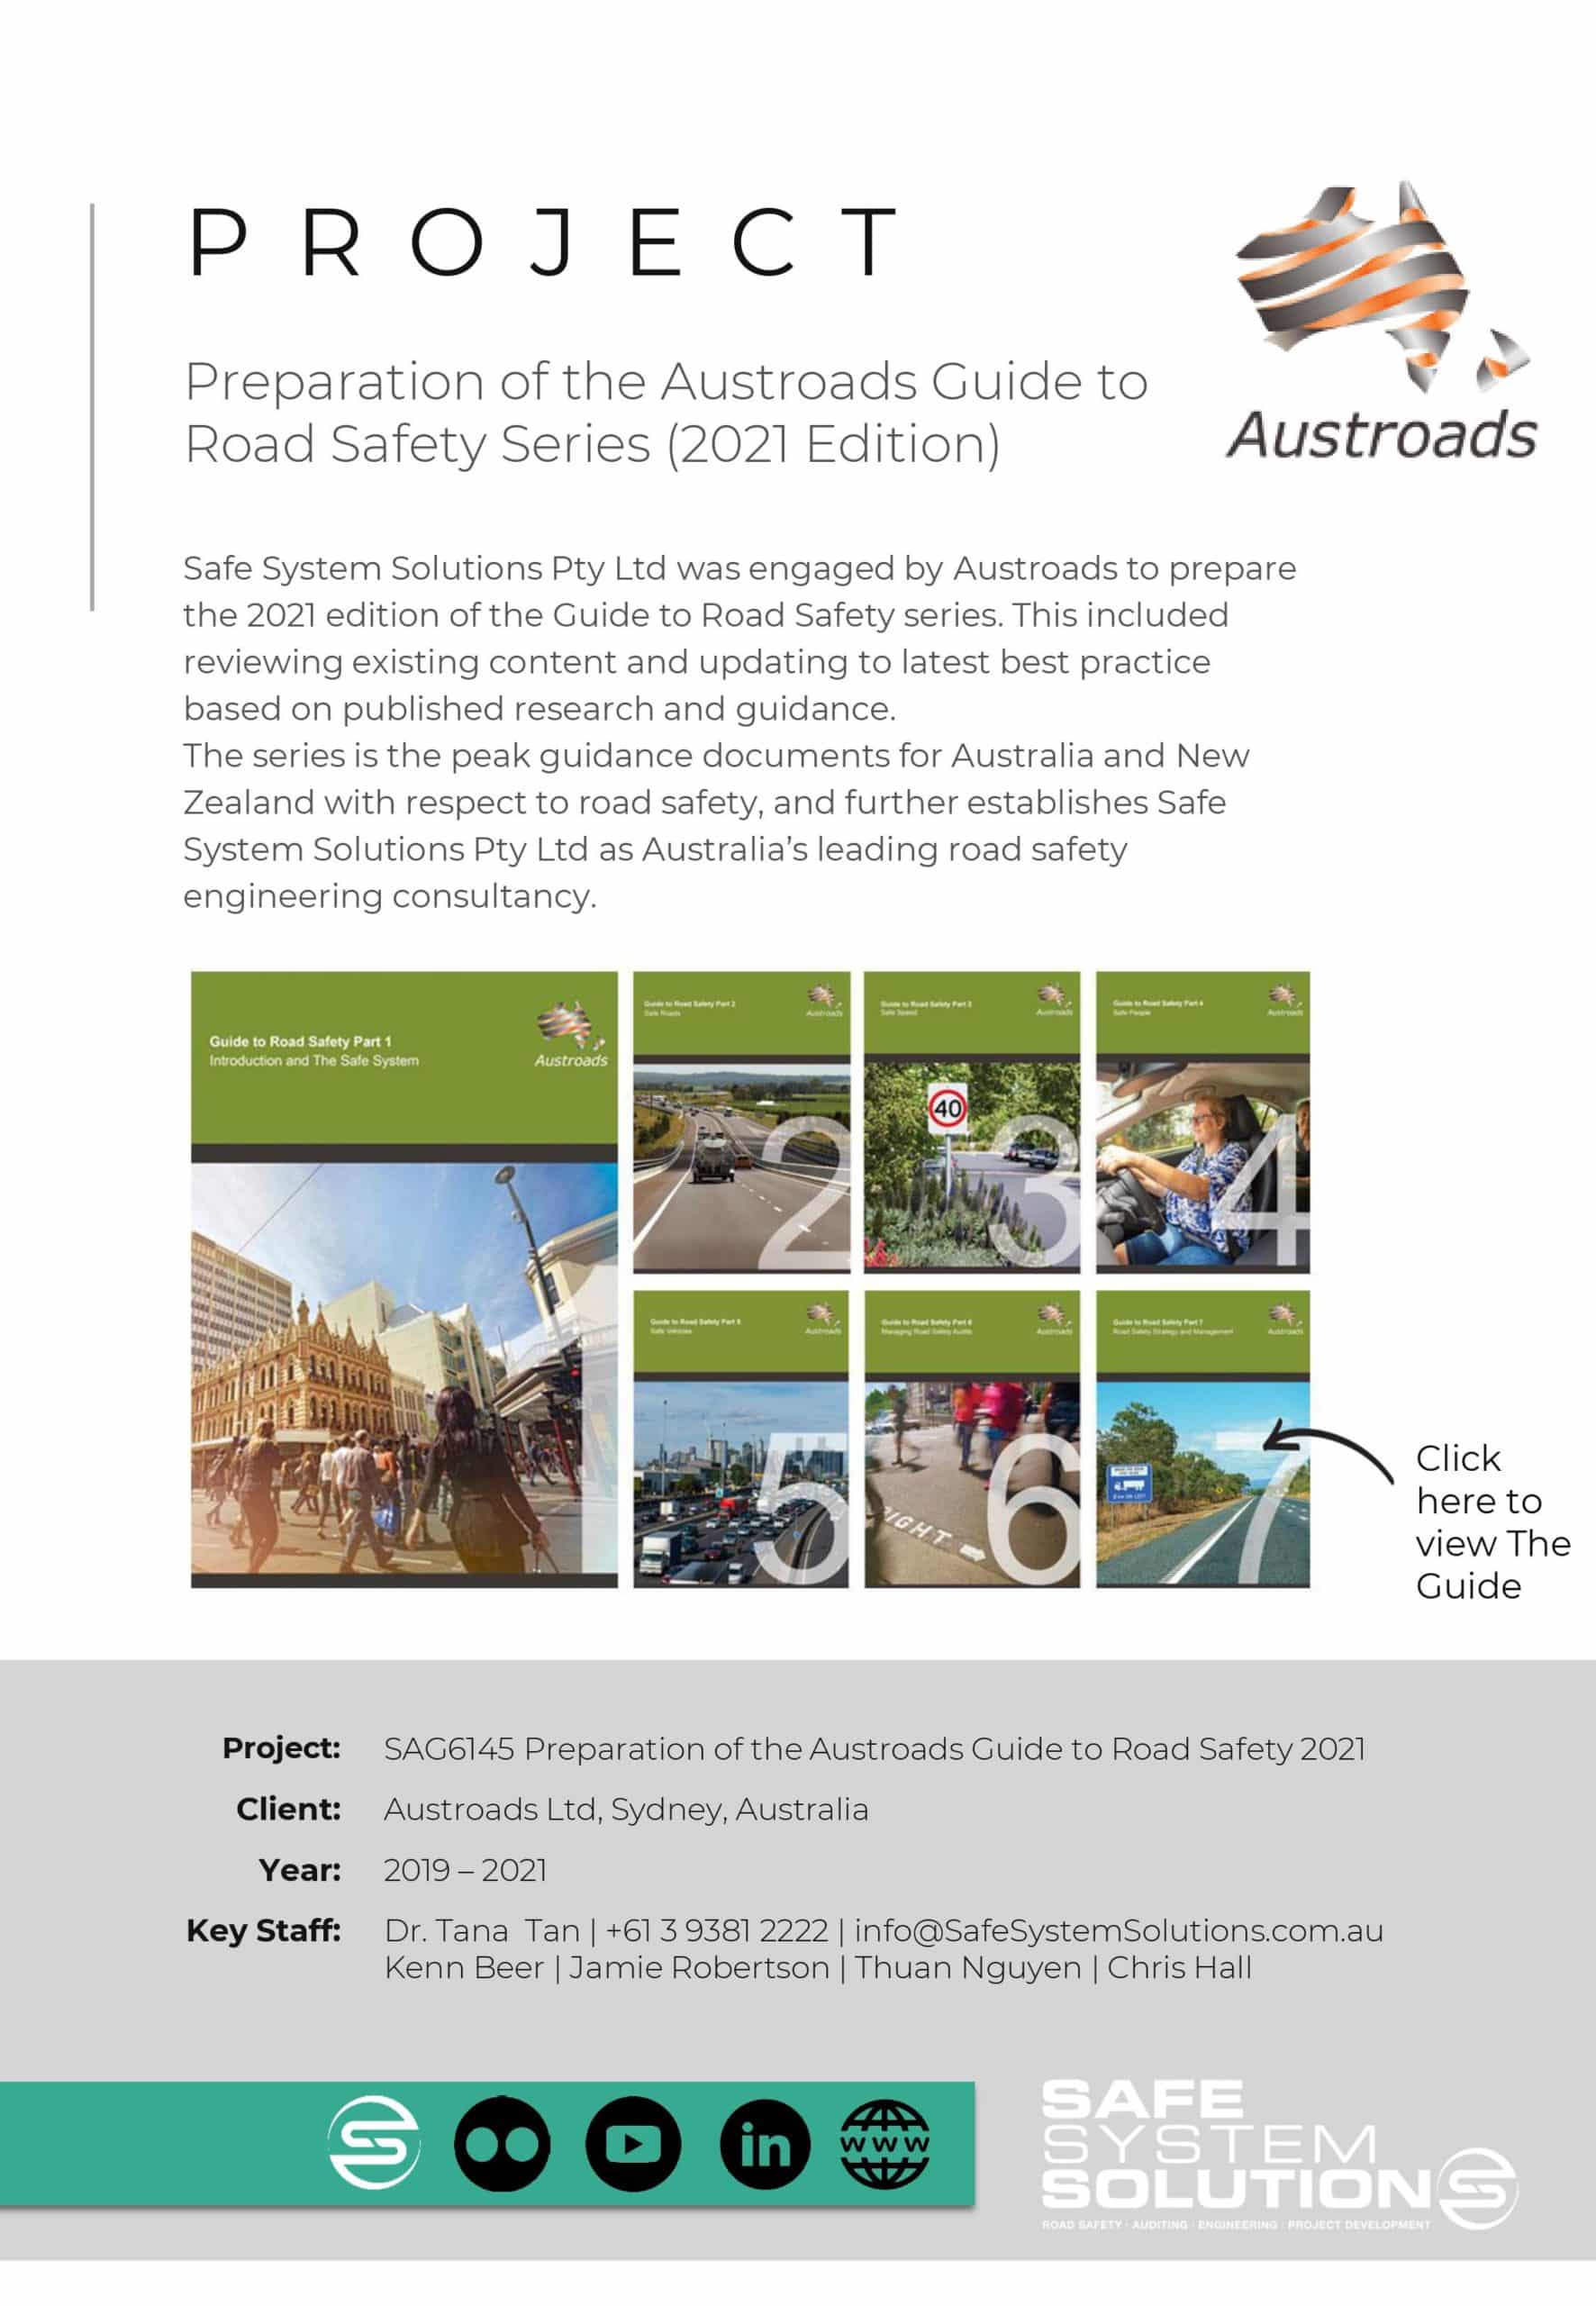 Preparation of the Austroads Guide to Road Safety Series (2021 Edition)